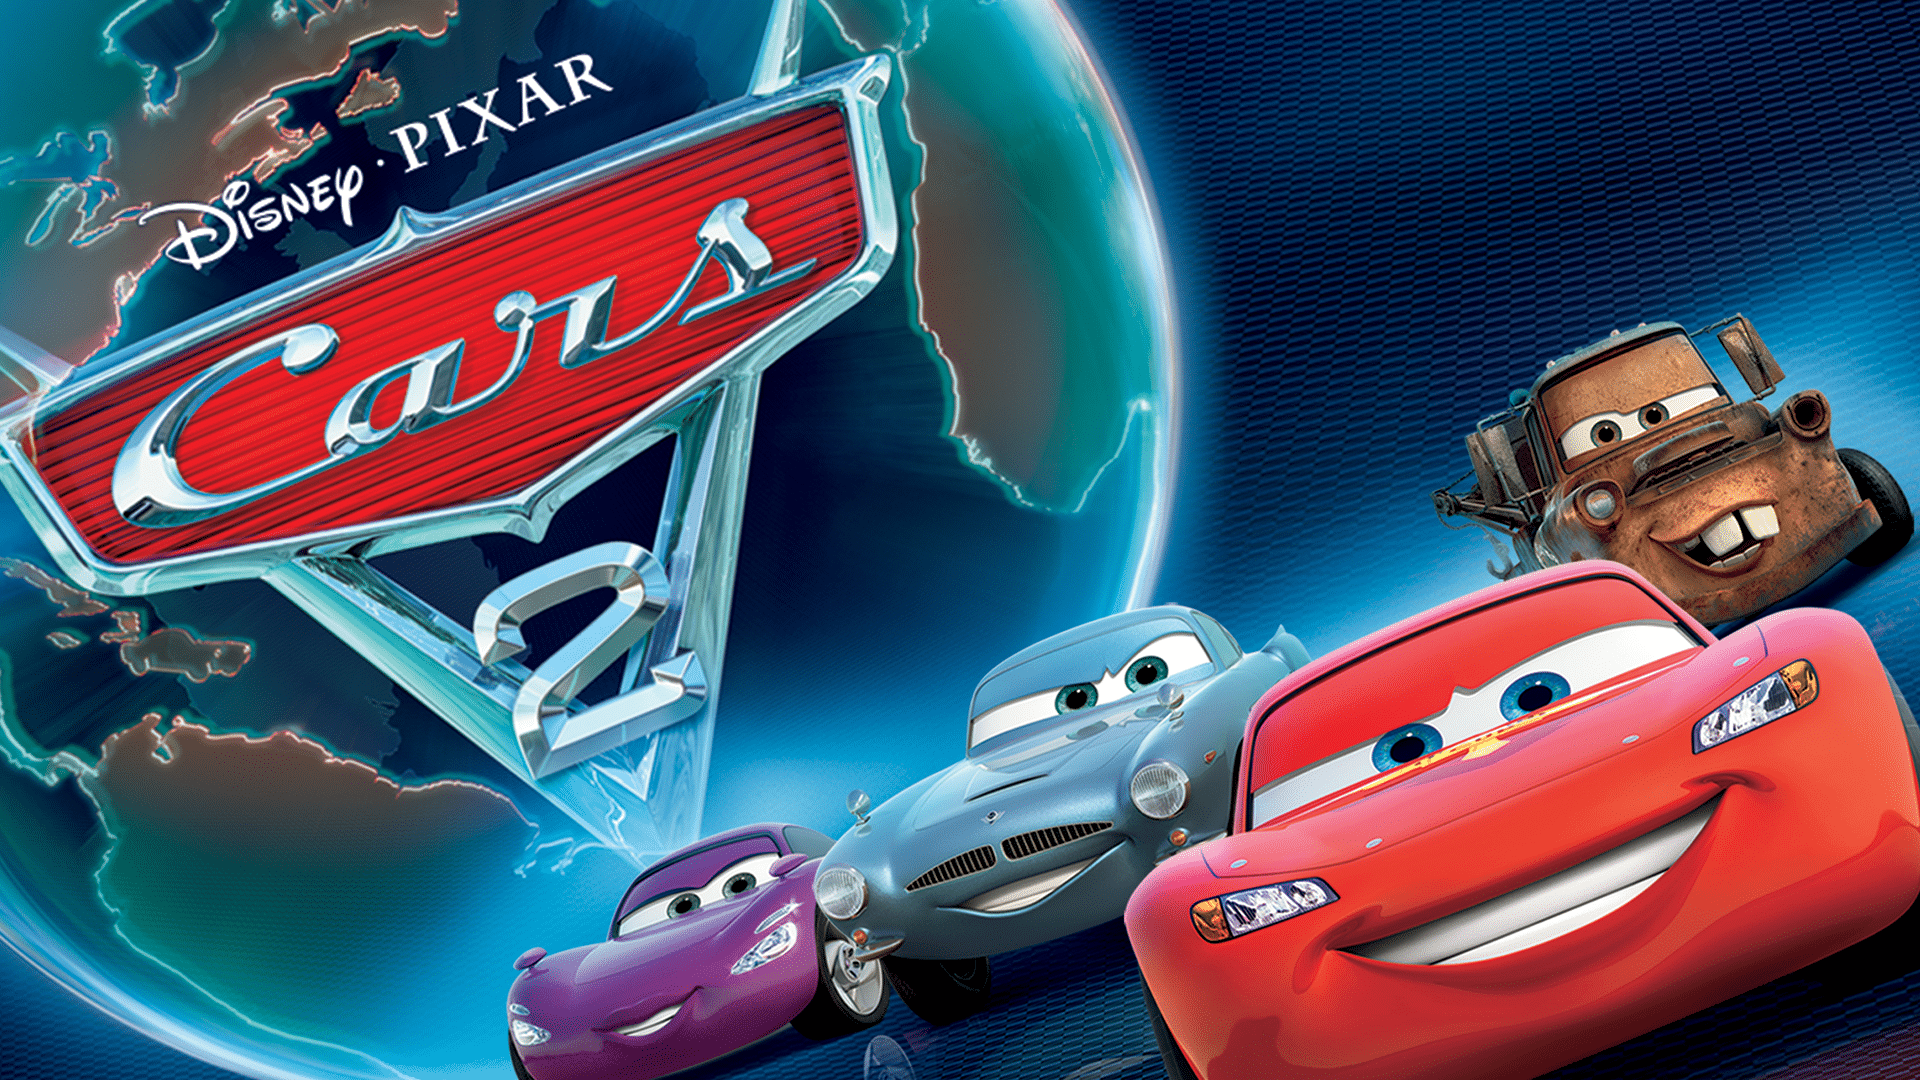 cars 2 games